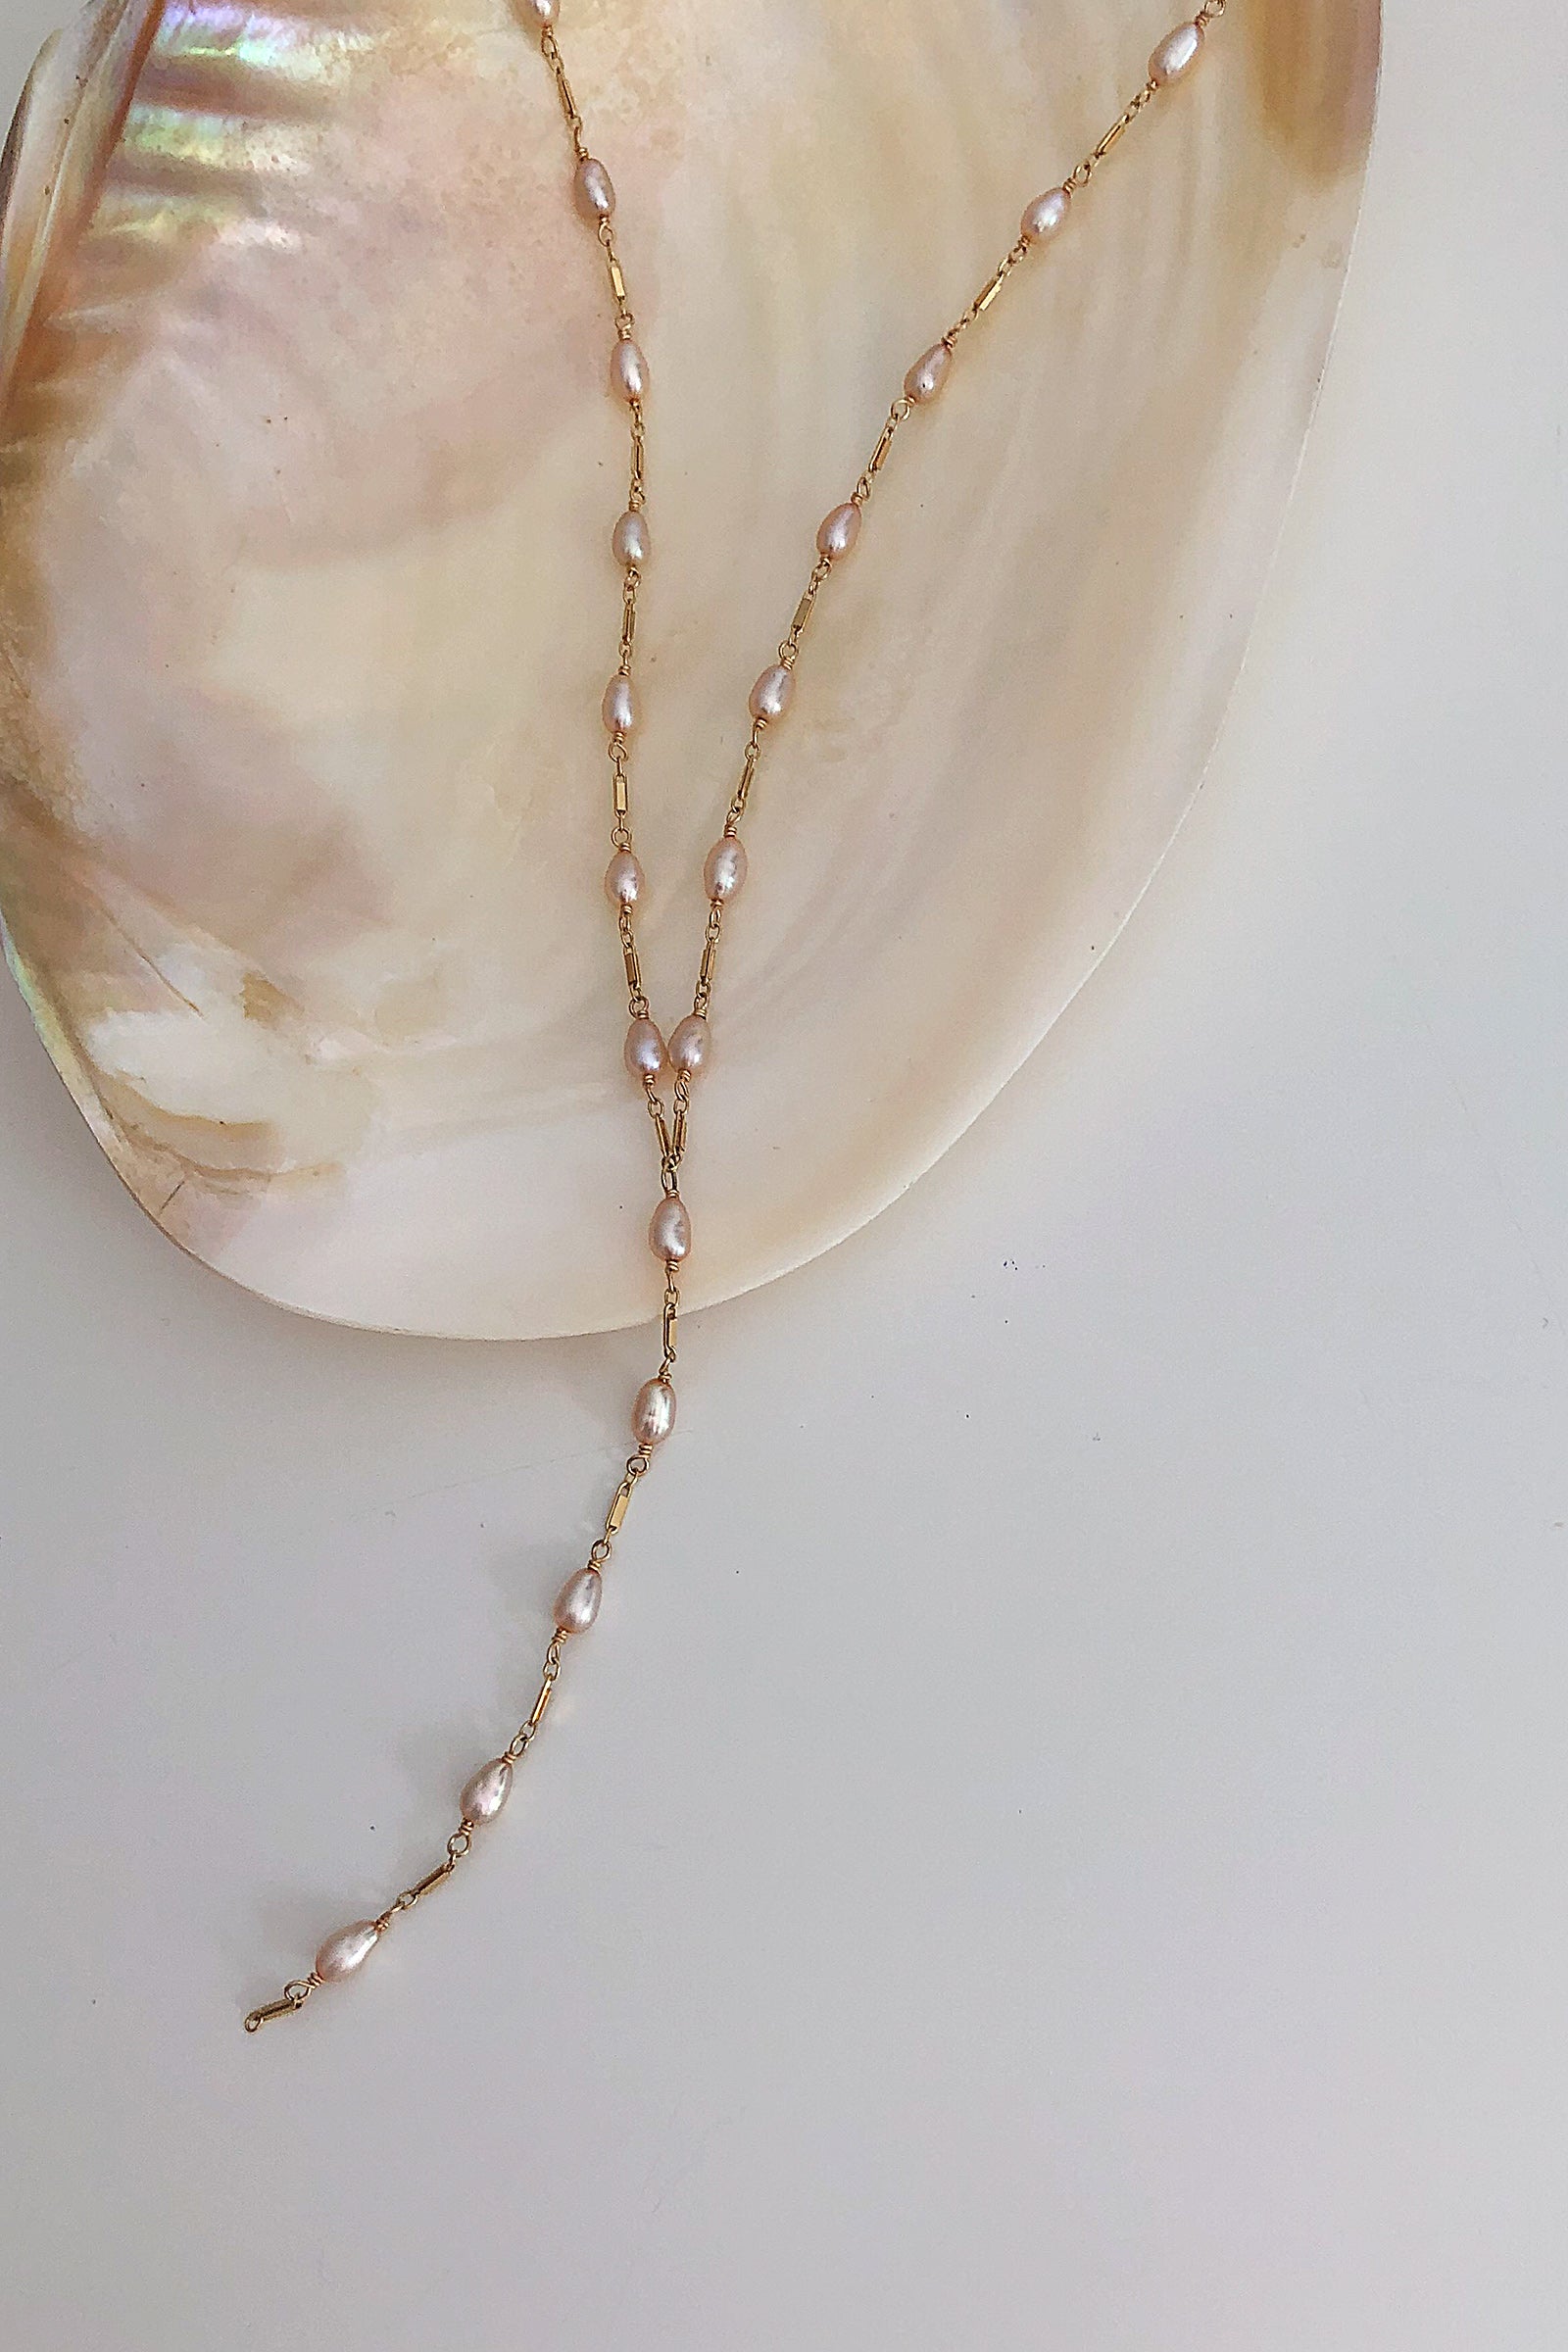 Dripping Freshwater Pearl Necklace - Christine Elizabeth Jewelry